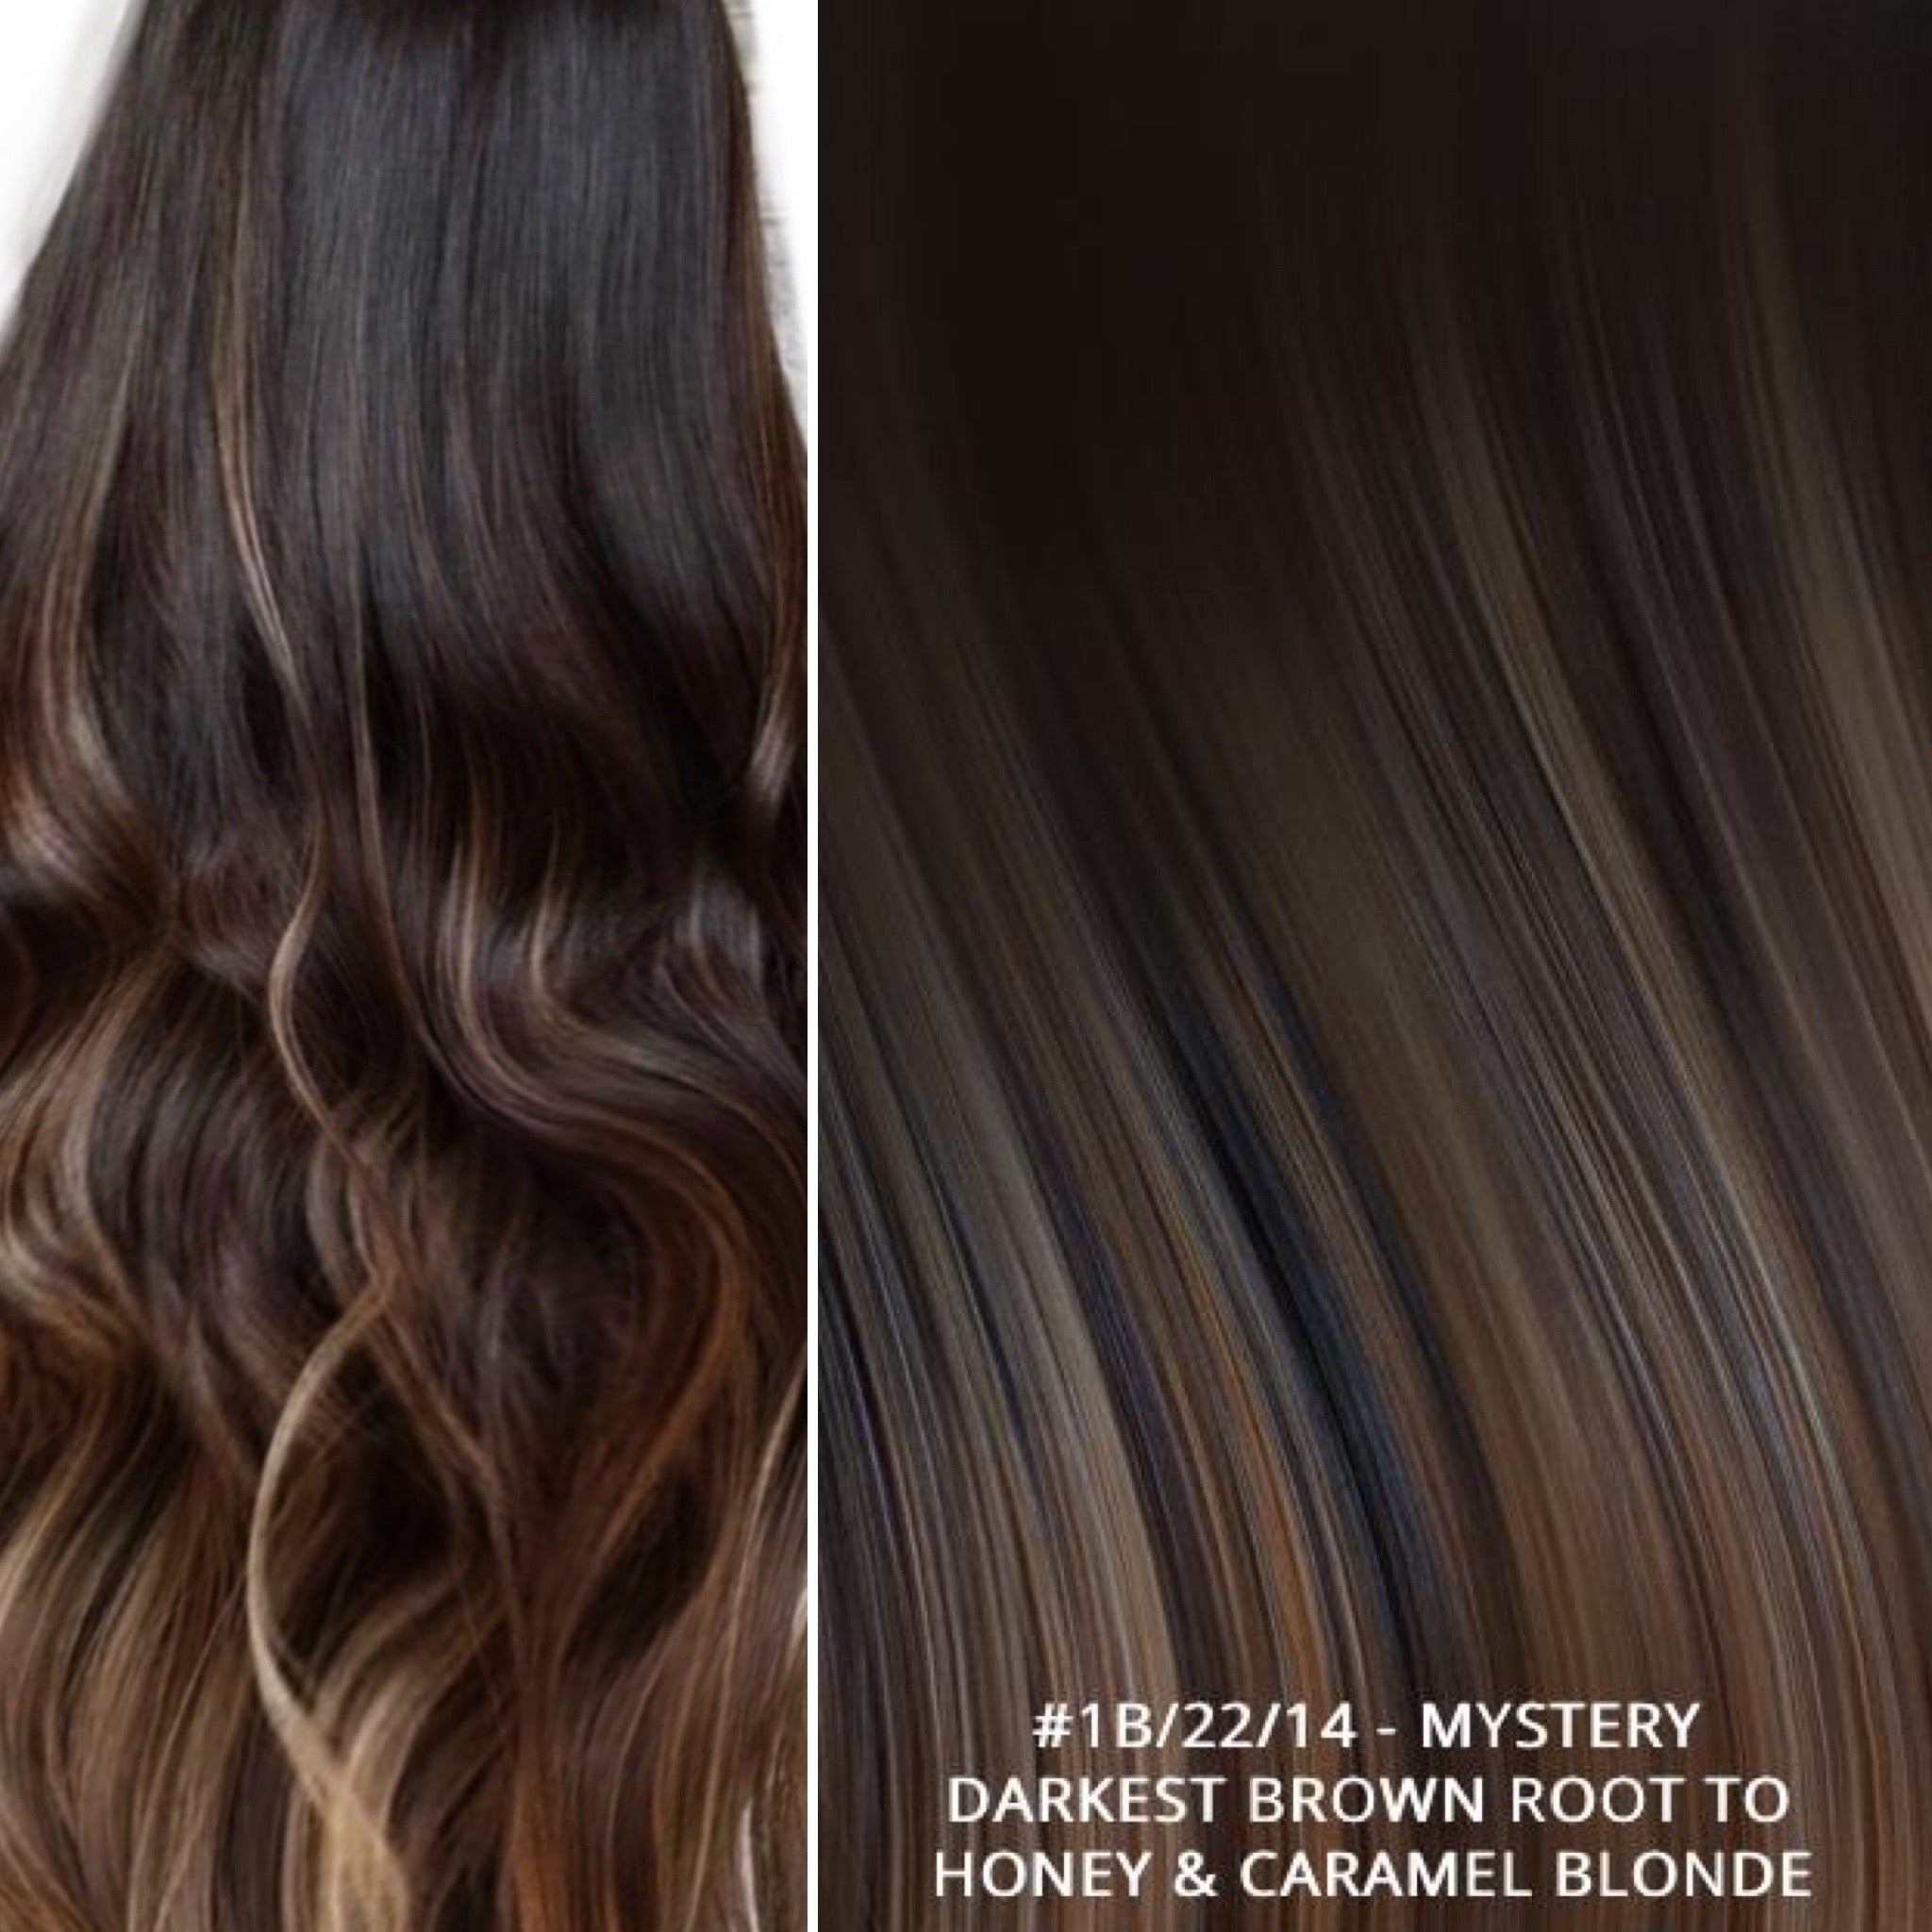 RUSSIAN TAPE BALAYAGE OMBRE HAIR EXTENSIONS #1B/22/14 - MYSTERY - DARKEST BROWN ROOT TO HONEY & CARAMEL BLONDE